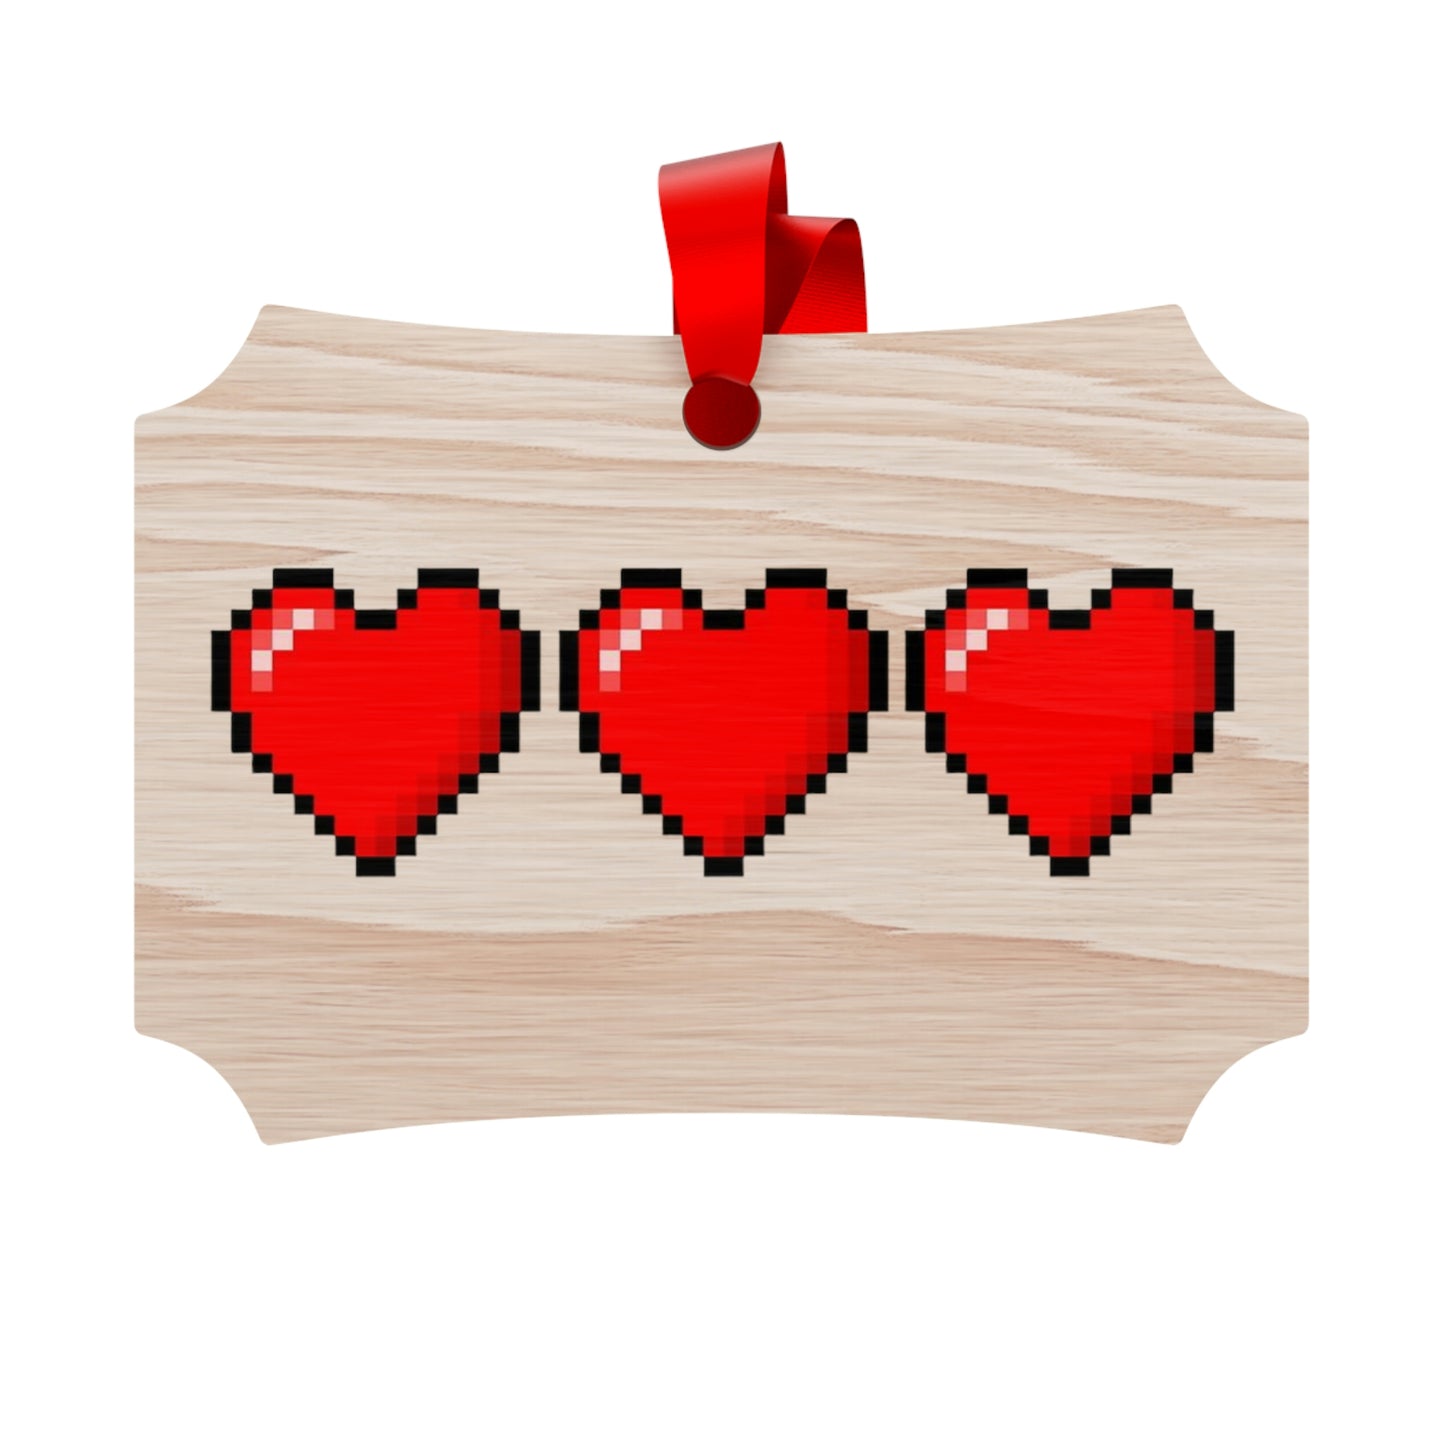 Hearts 8 Bit Style Wooden Christmas Ornaments